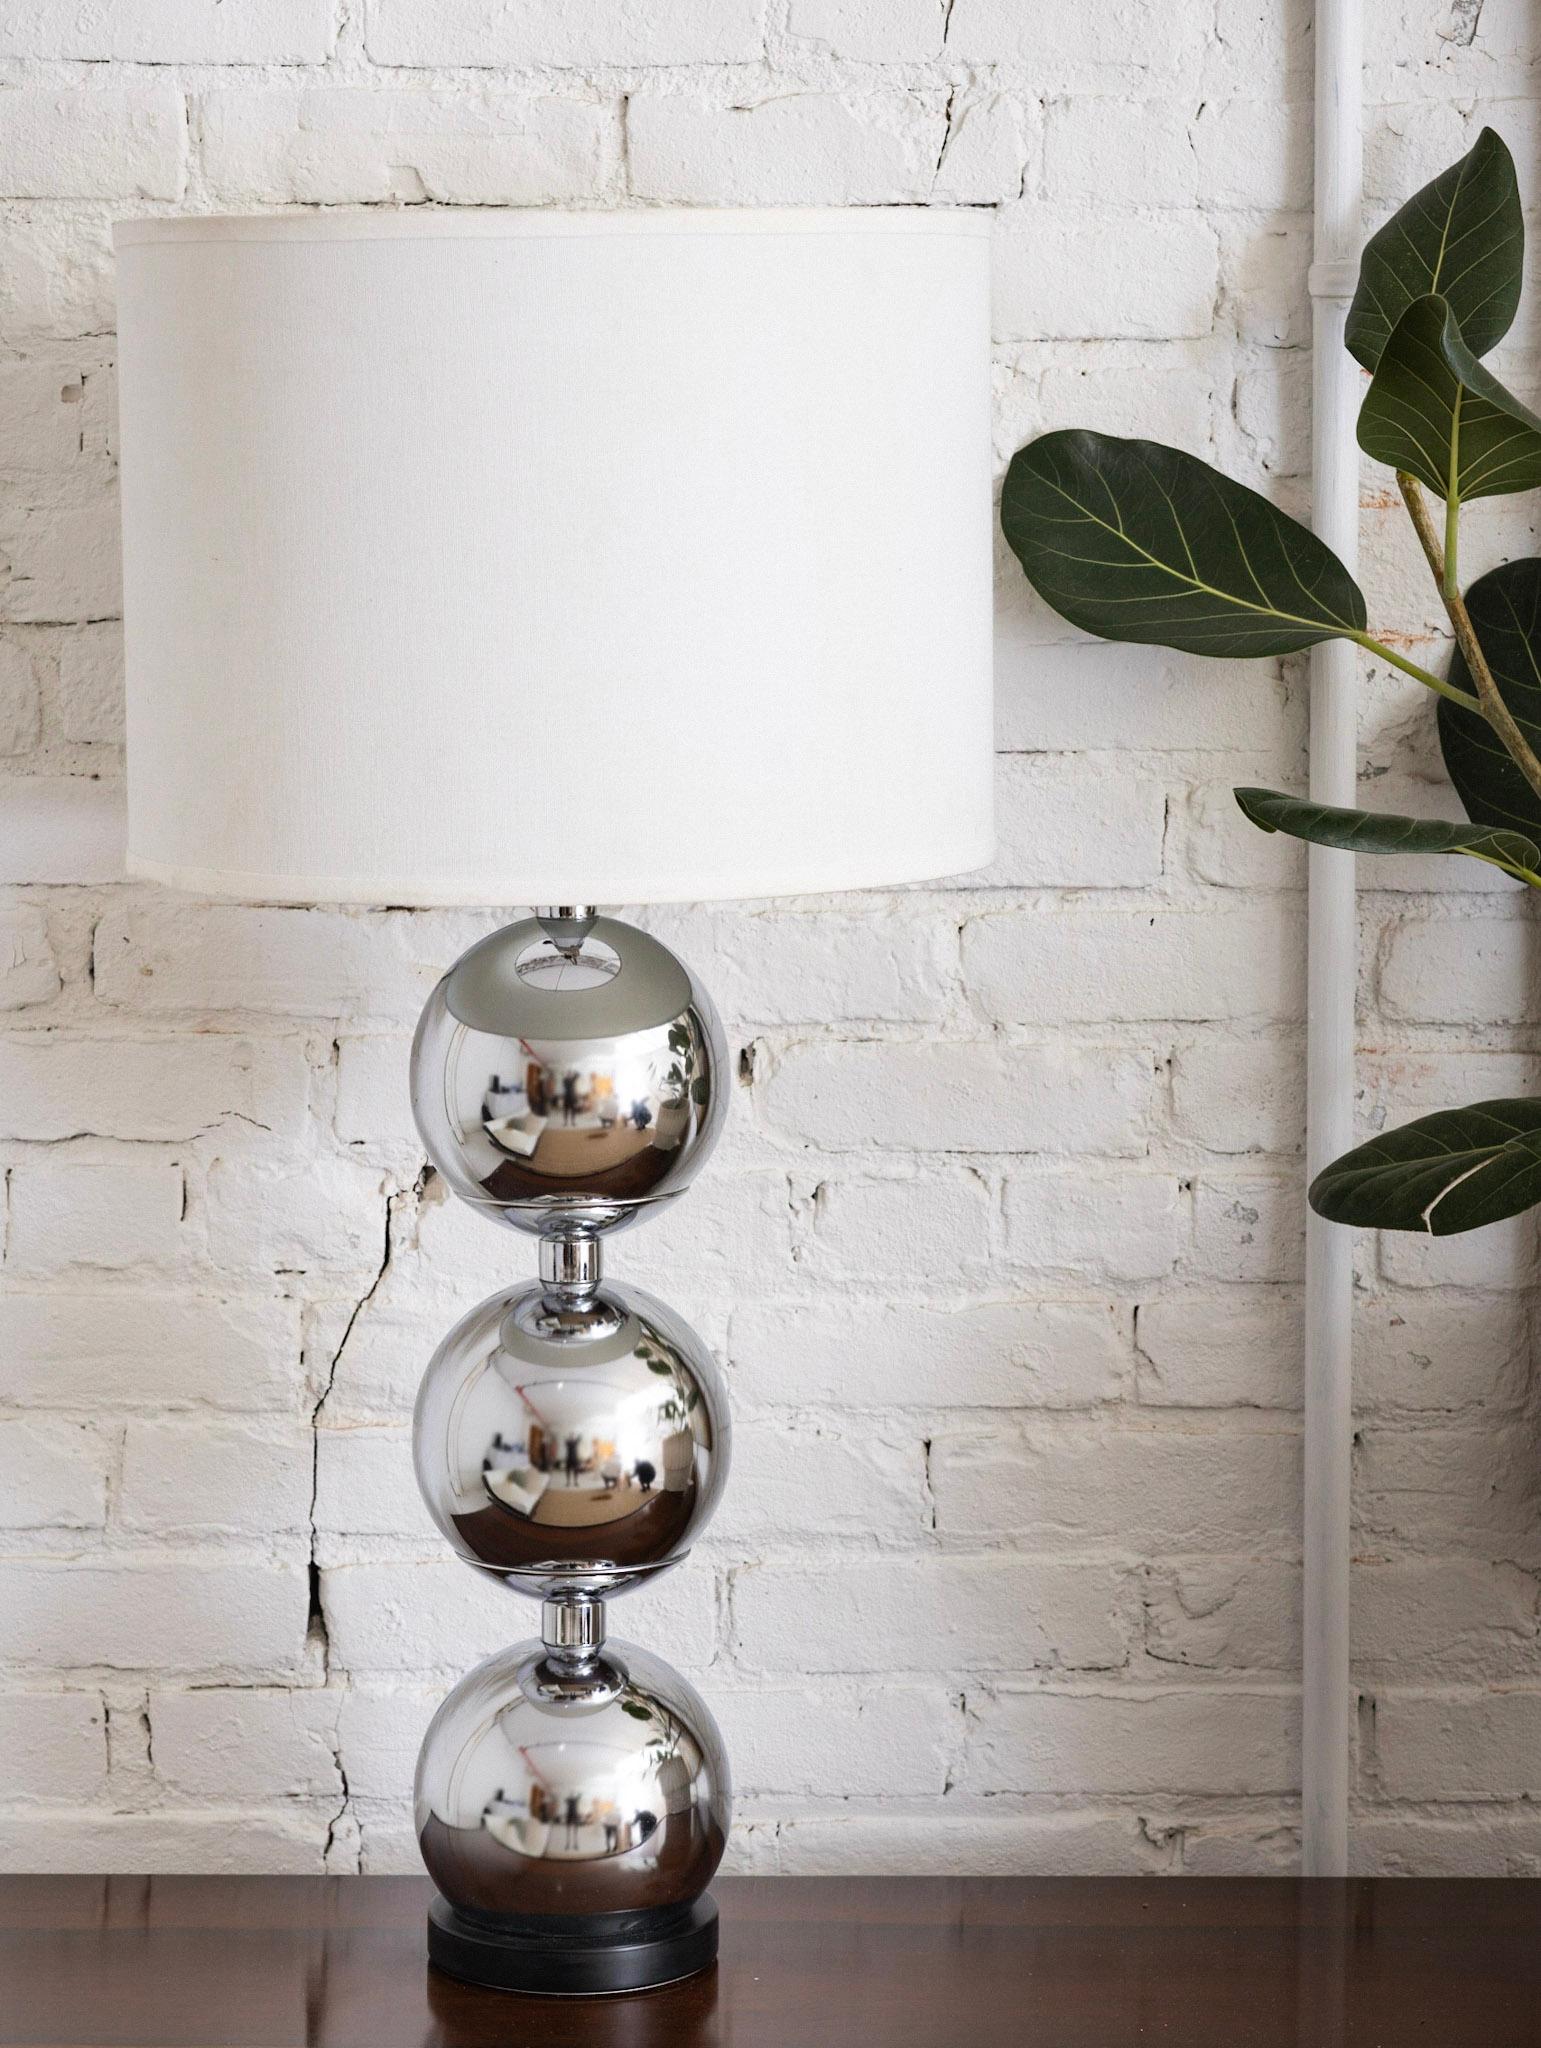 Mid-Century Modern chrome table lamp. Triple stacked sphere Silhouette. Black round plinth base. Harp and finial included. Shade NOT included. Measured from base to top of finial.